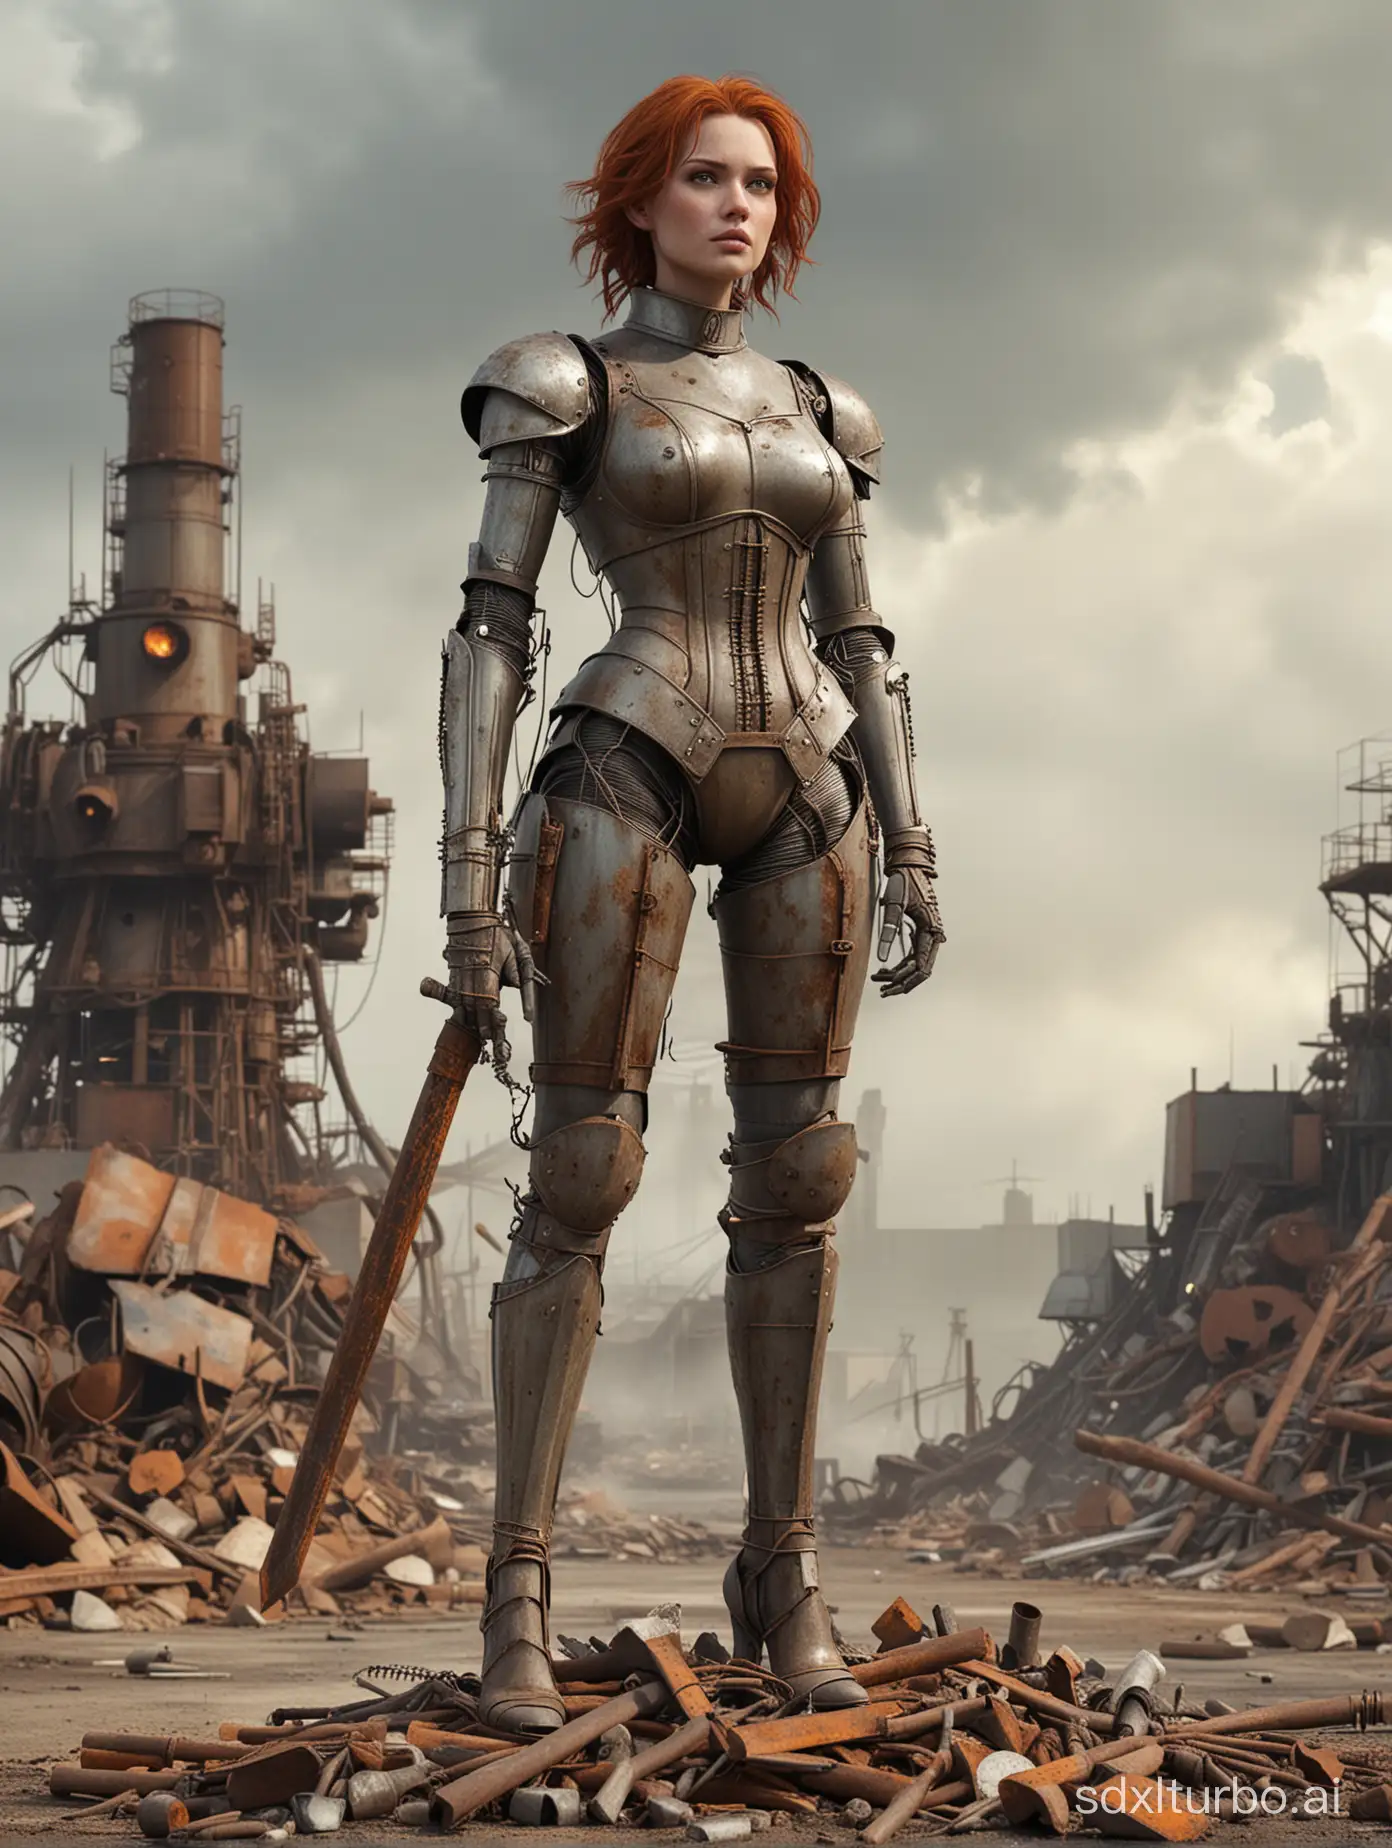 Rusty-Tin-Woman-Stands-Defiant-with-Rust-Sword-in-Desolate-Scrapyard